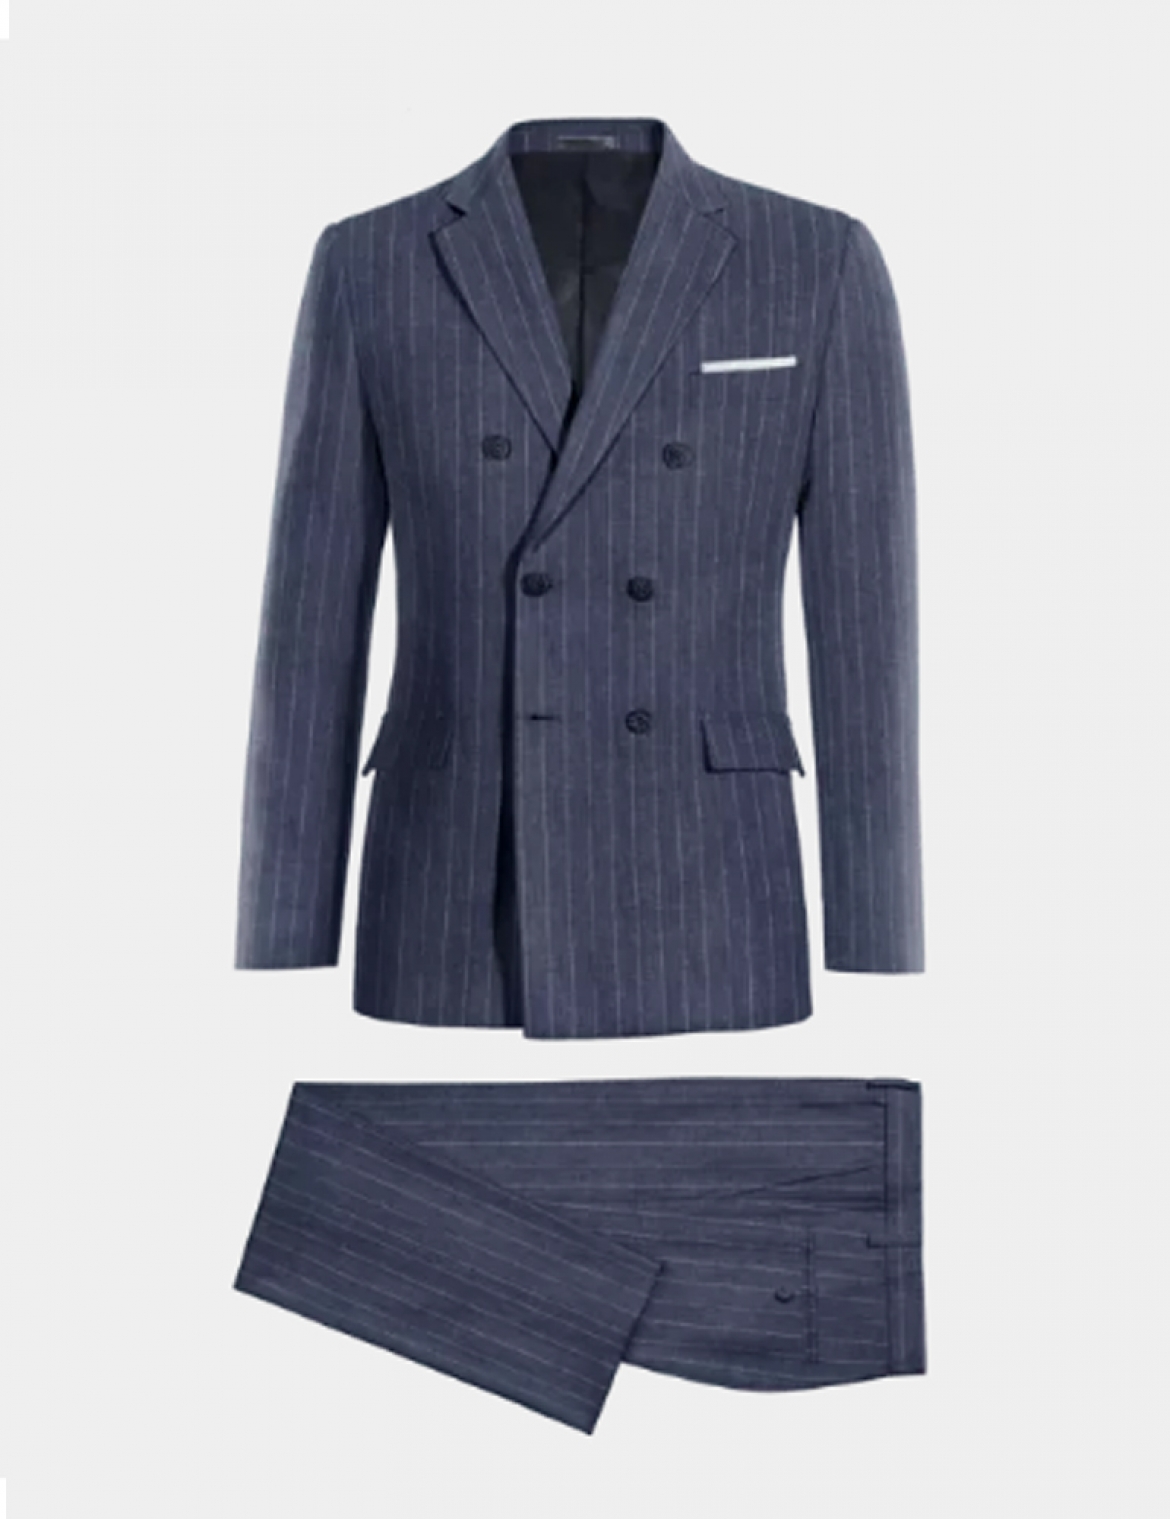 Double Breasted Suit - Blue striped linen